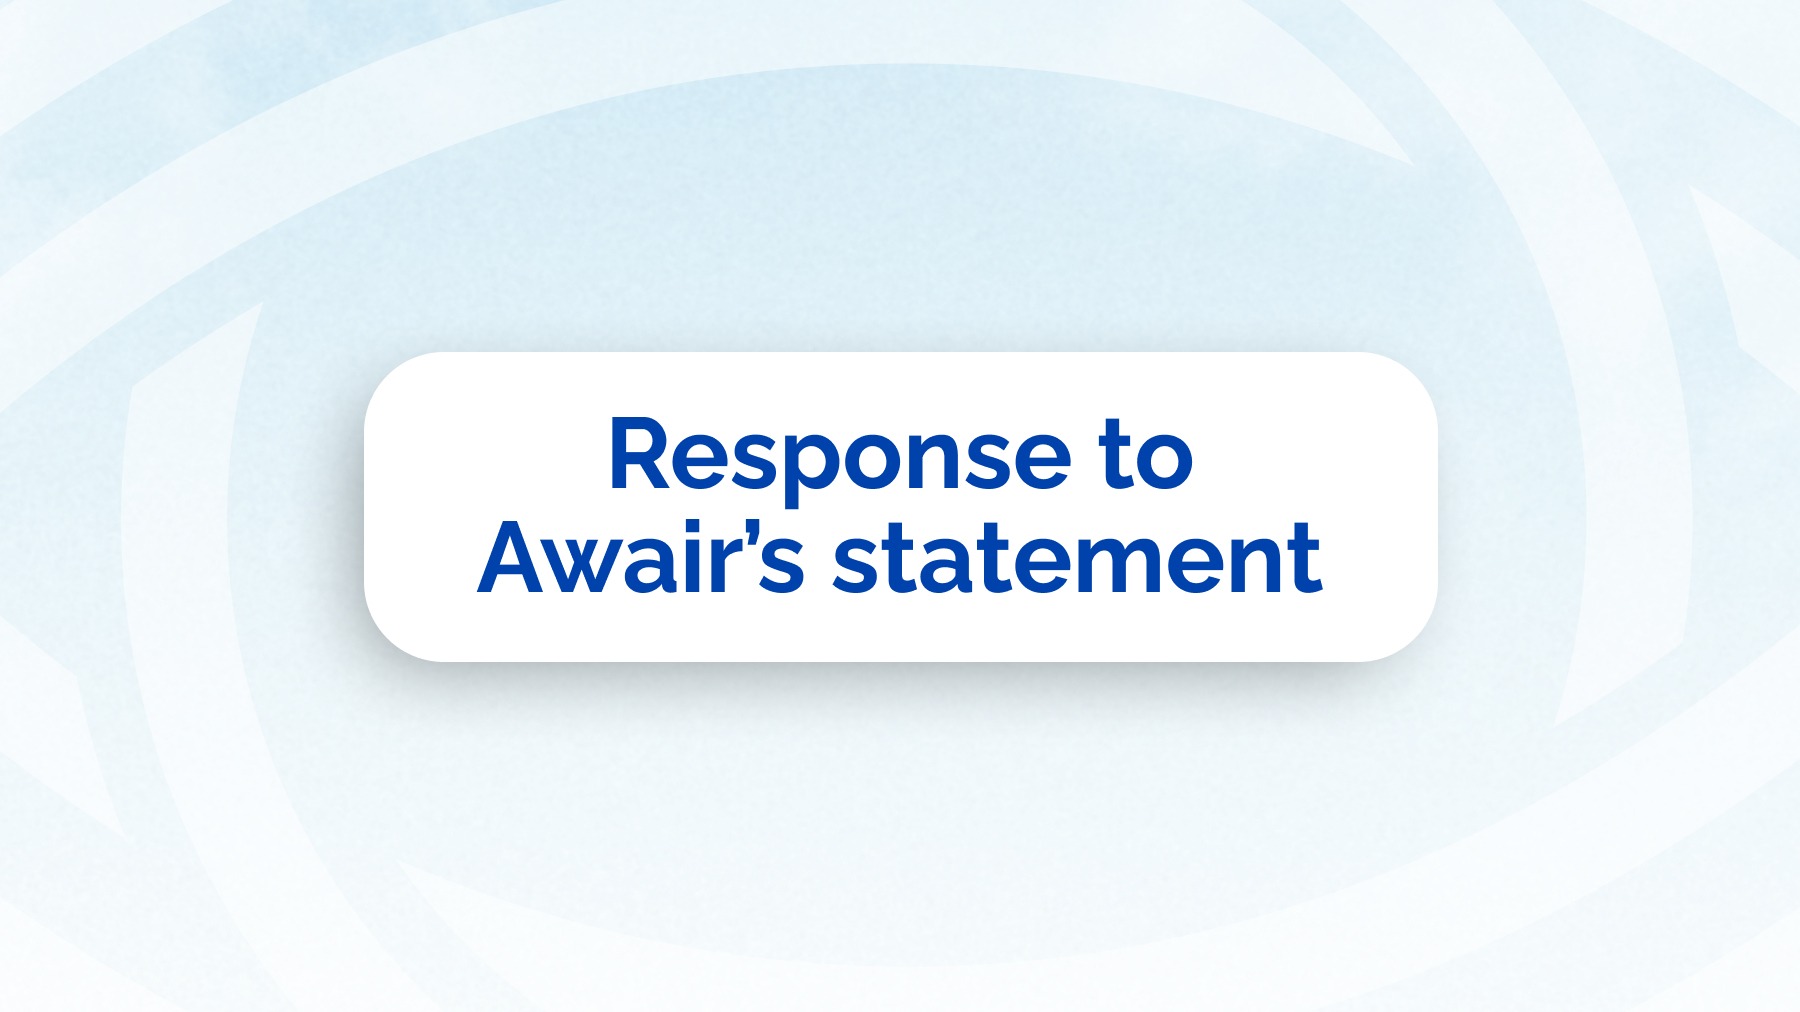 Response to Awair's statement | PlanetWatch